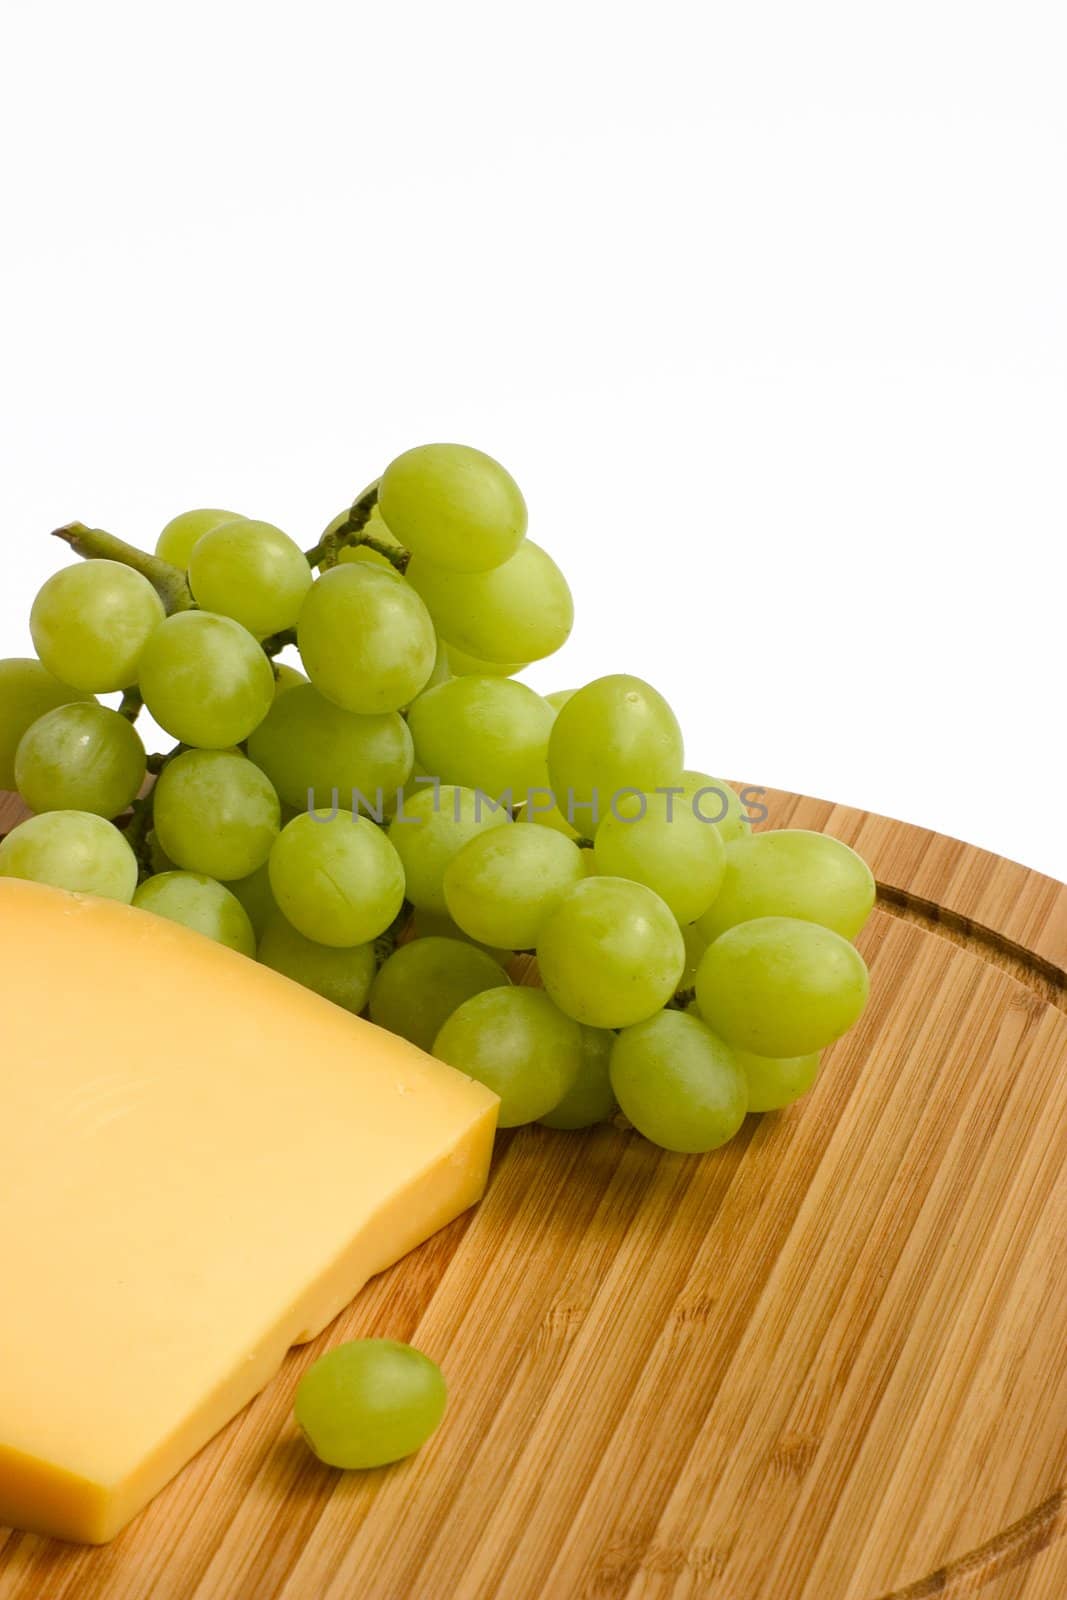 green grapes and cheese on a wooden board